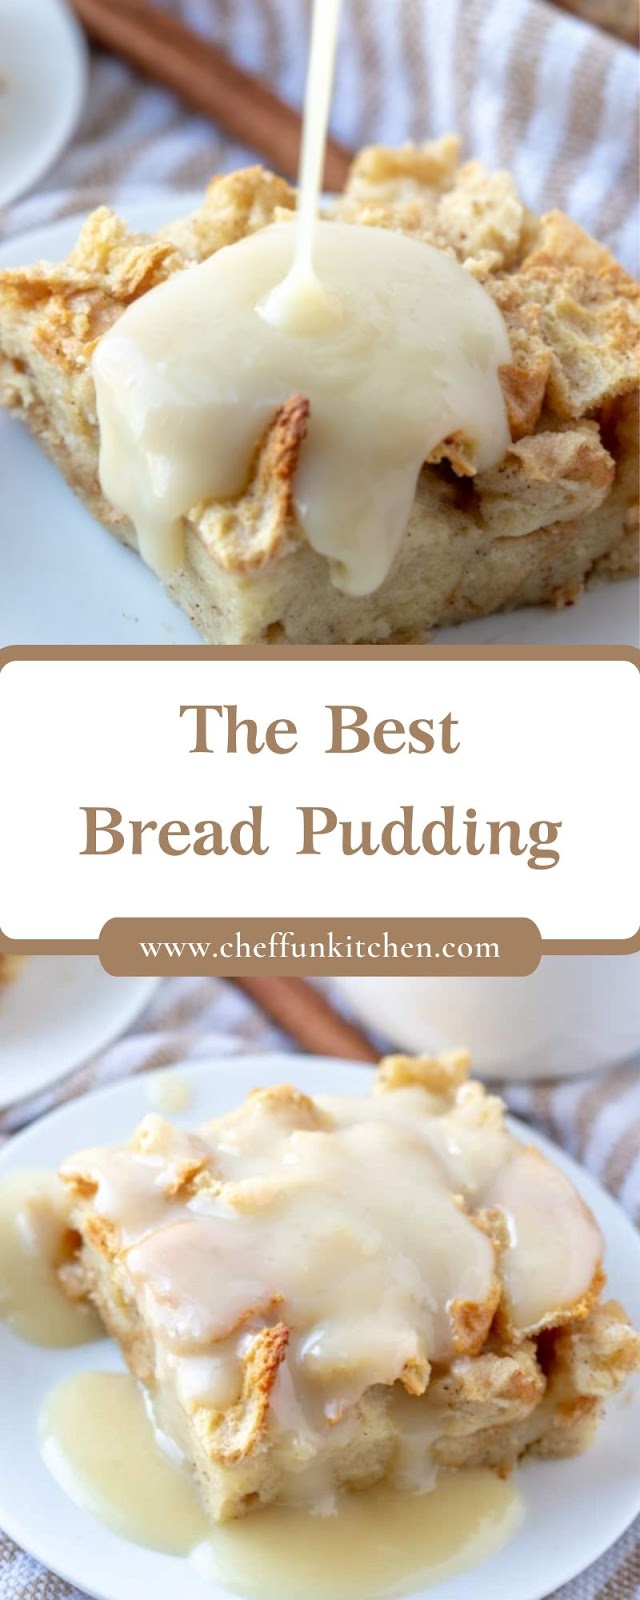 The Best Bread Pudding